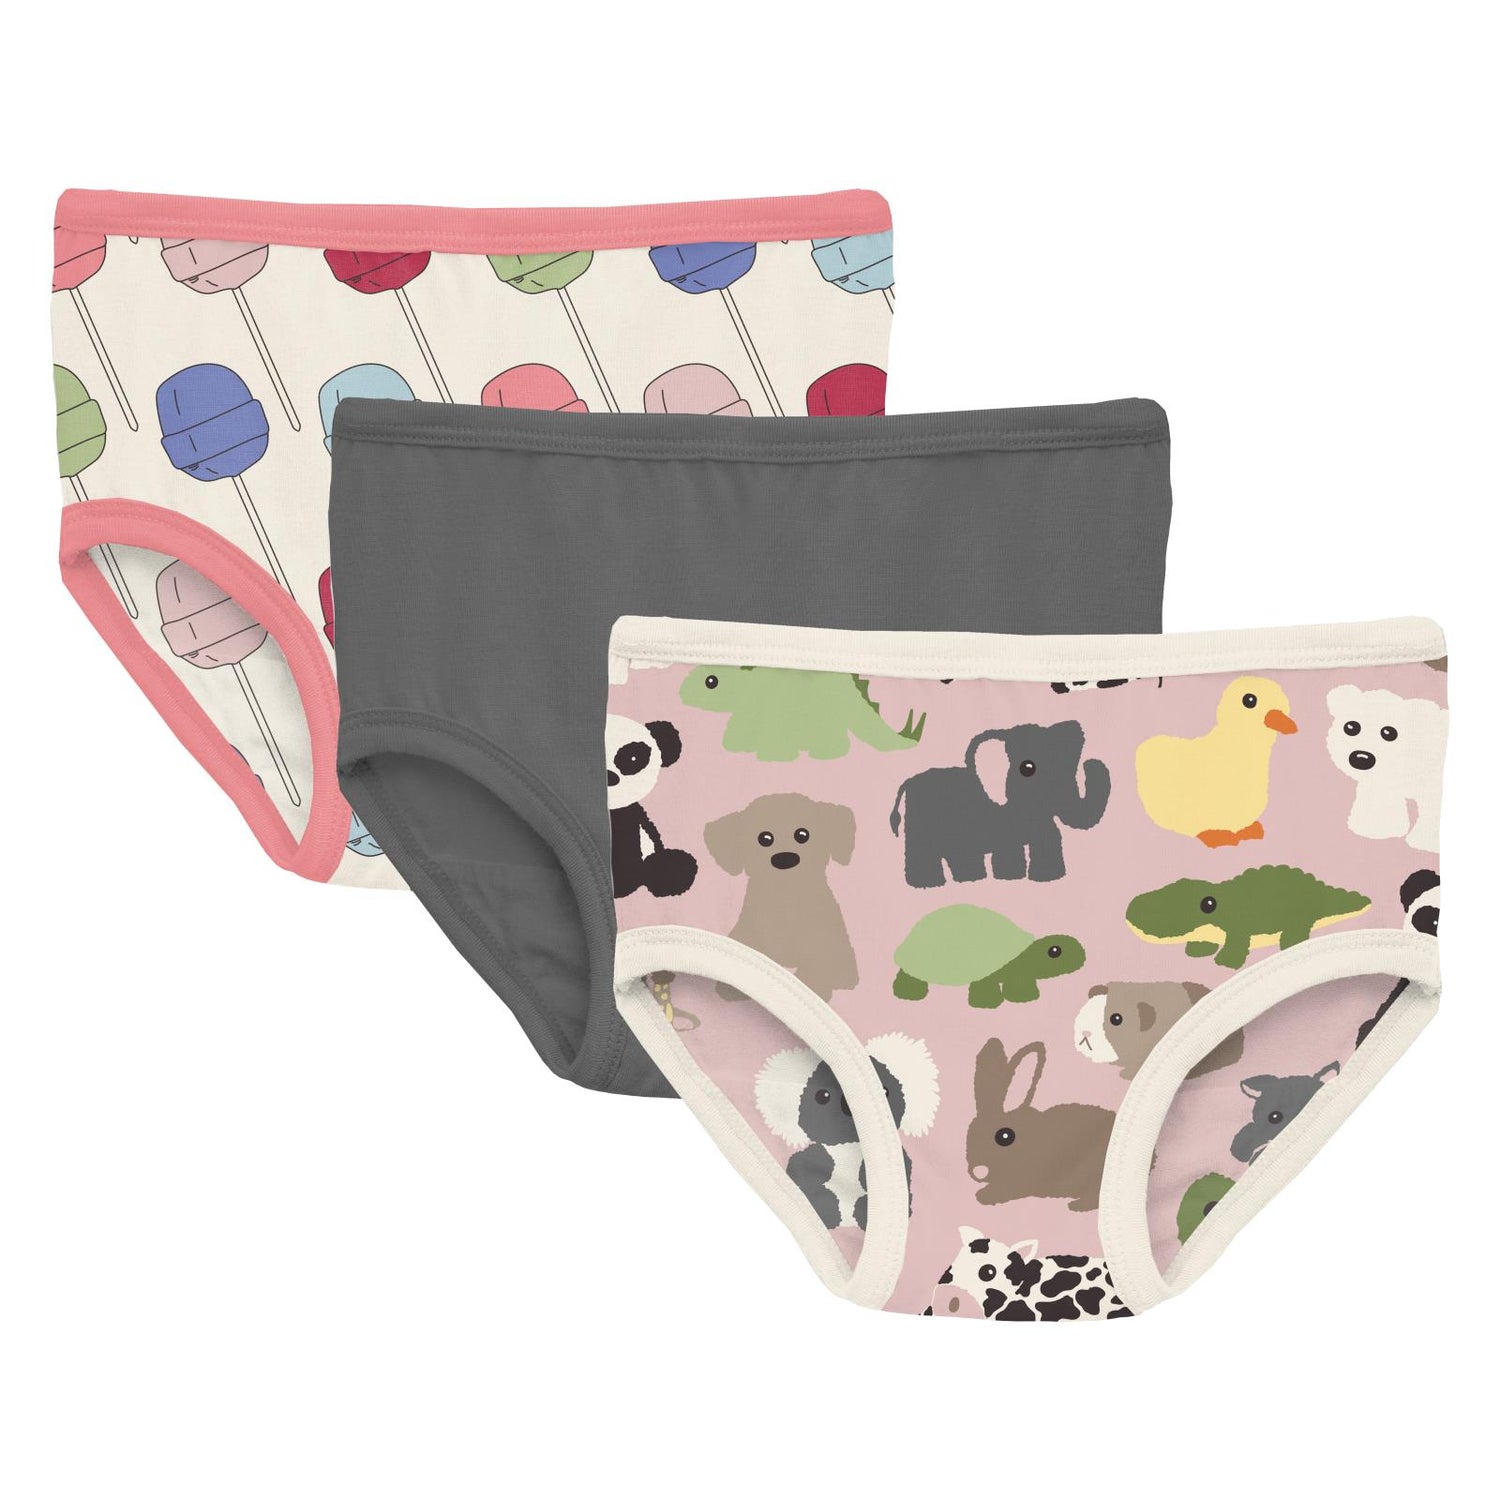 Print Girl's Underwear Set of 3 in Lula's Lollipops, Pewter & Baby Rose Too Many Stuffies